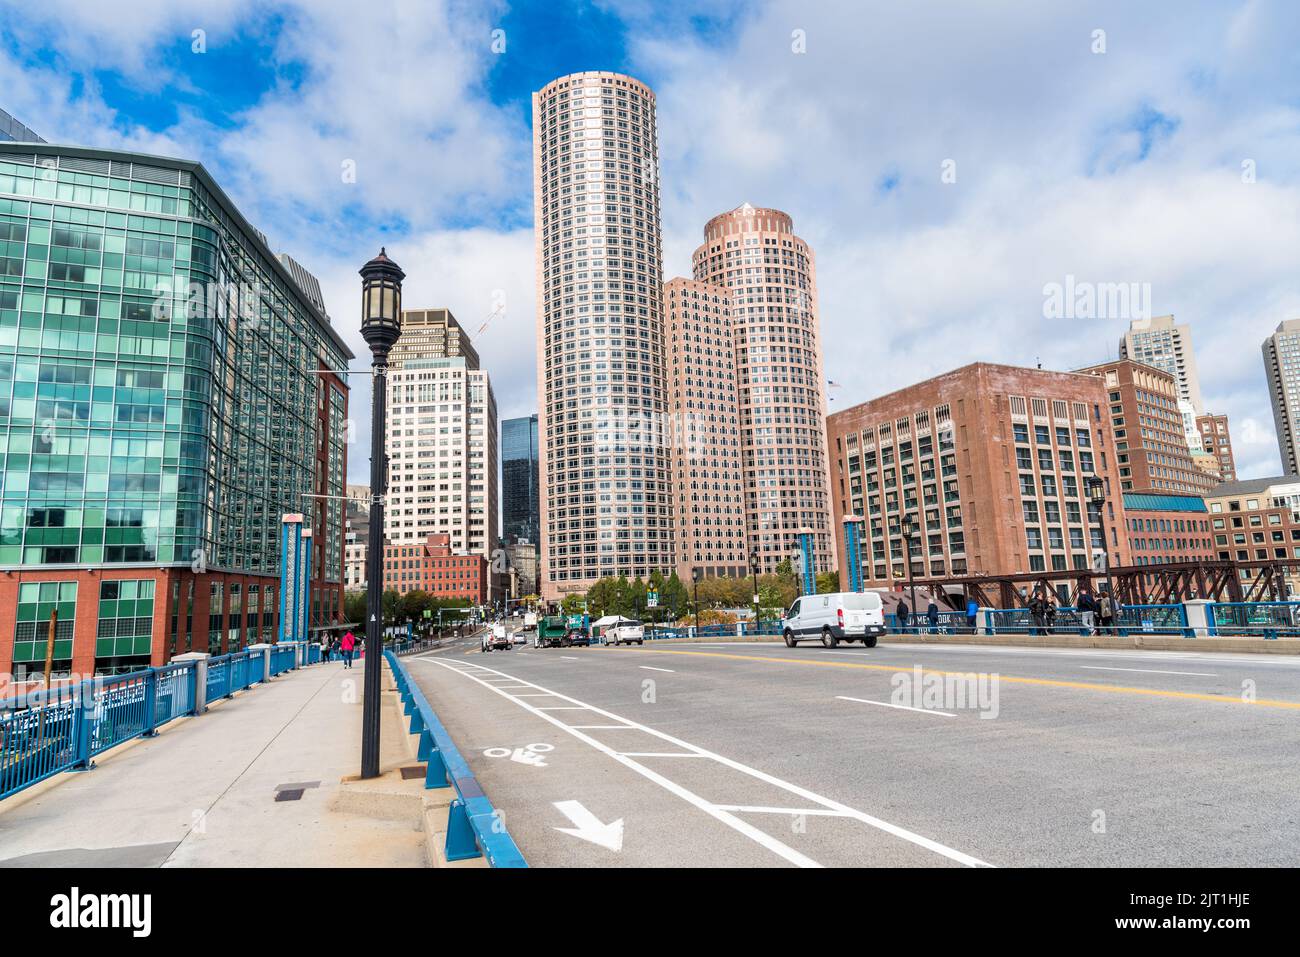 Boston, MA, USA - October 17, 2019: View of Boston Financial district skyline from Evelyn Moakley Bridge Stock Photo